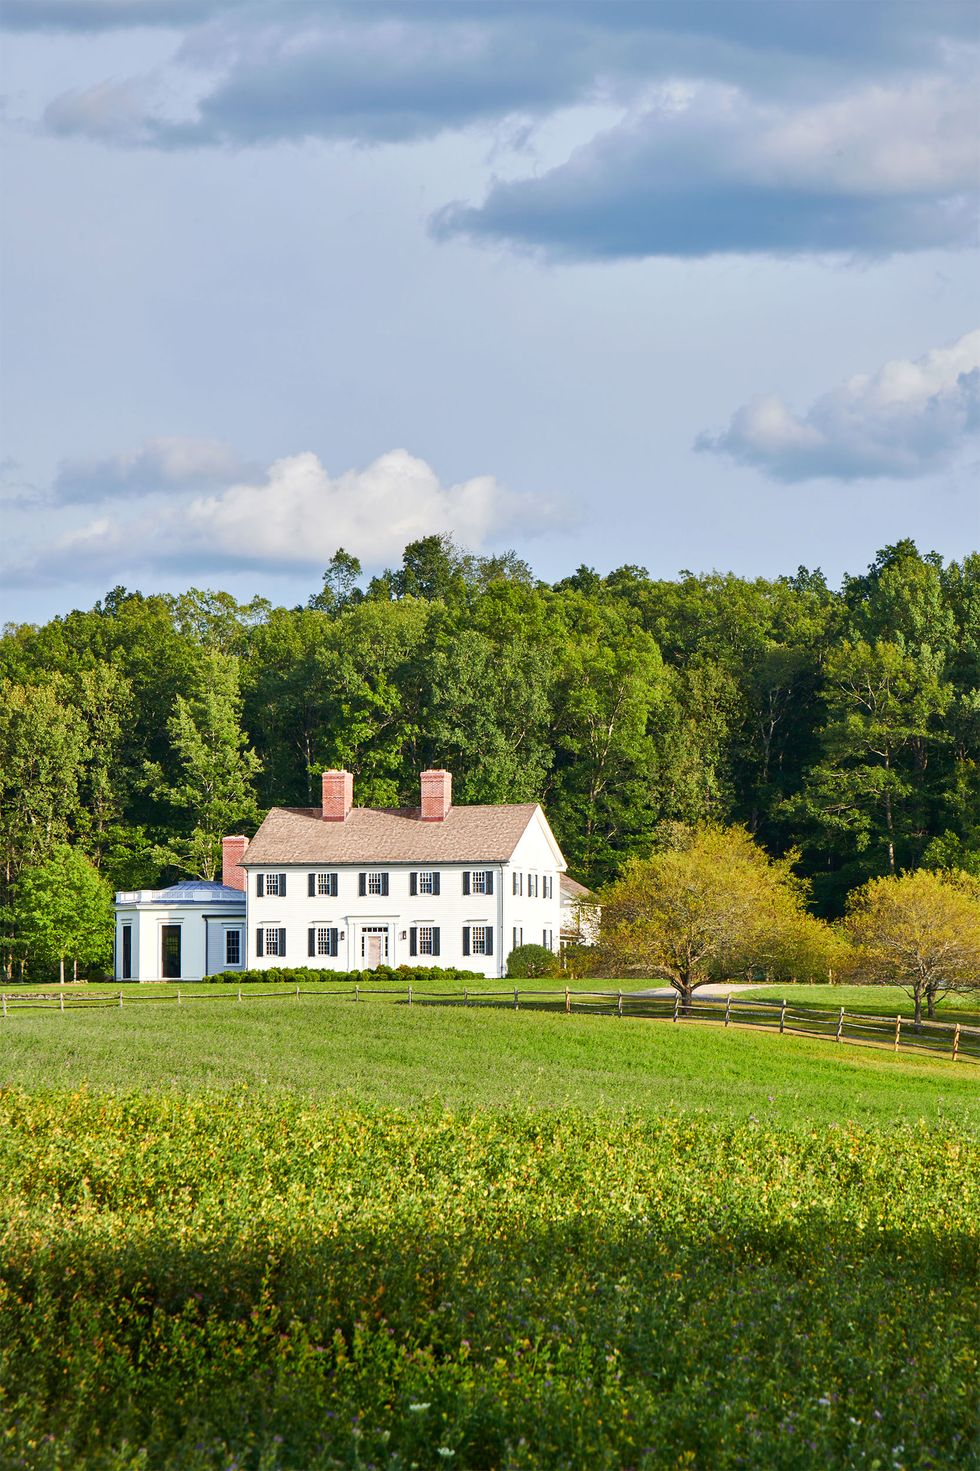 a colonial style white house with two floors and black shuttered windows with an octagonal single floor addition sits on a property with an expansive front lawn with a rustic horse fence, and tall trees behind the home